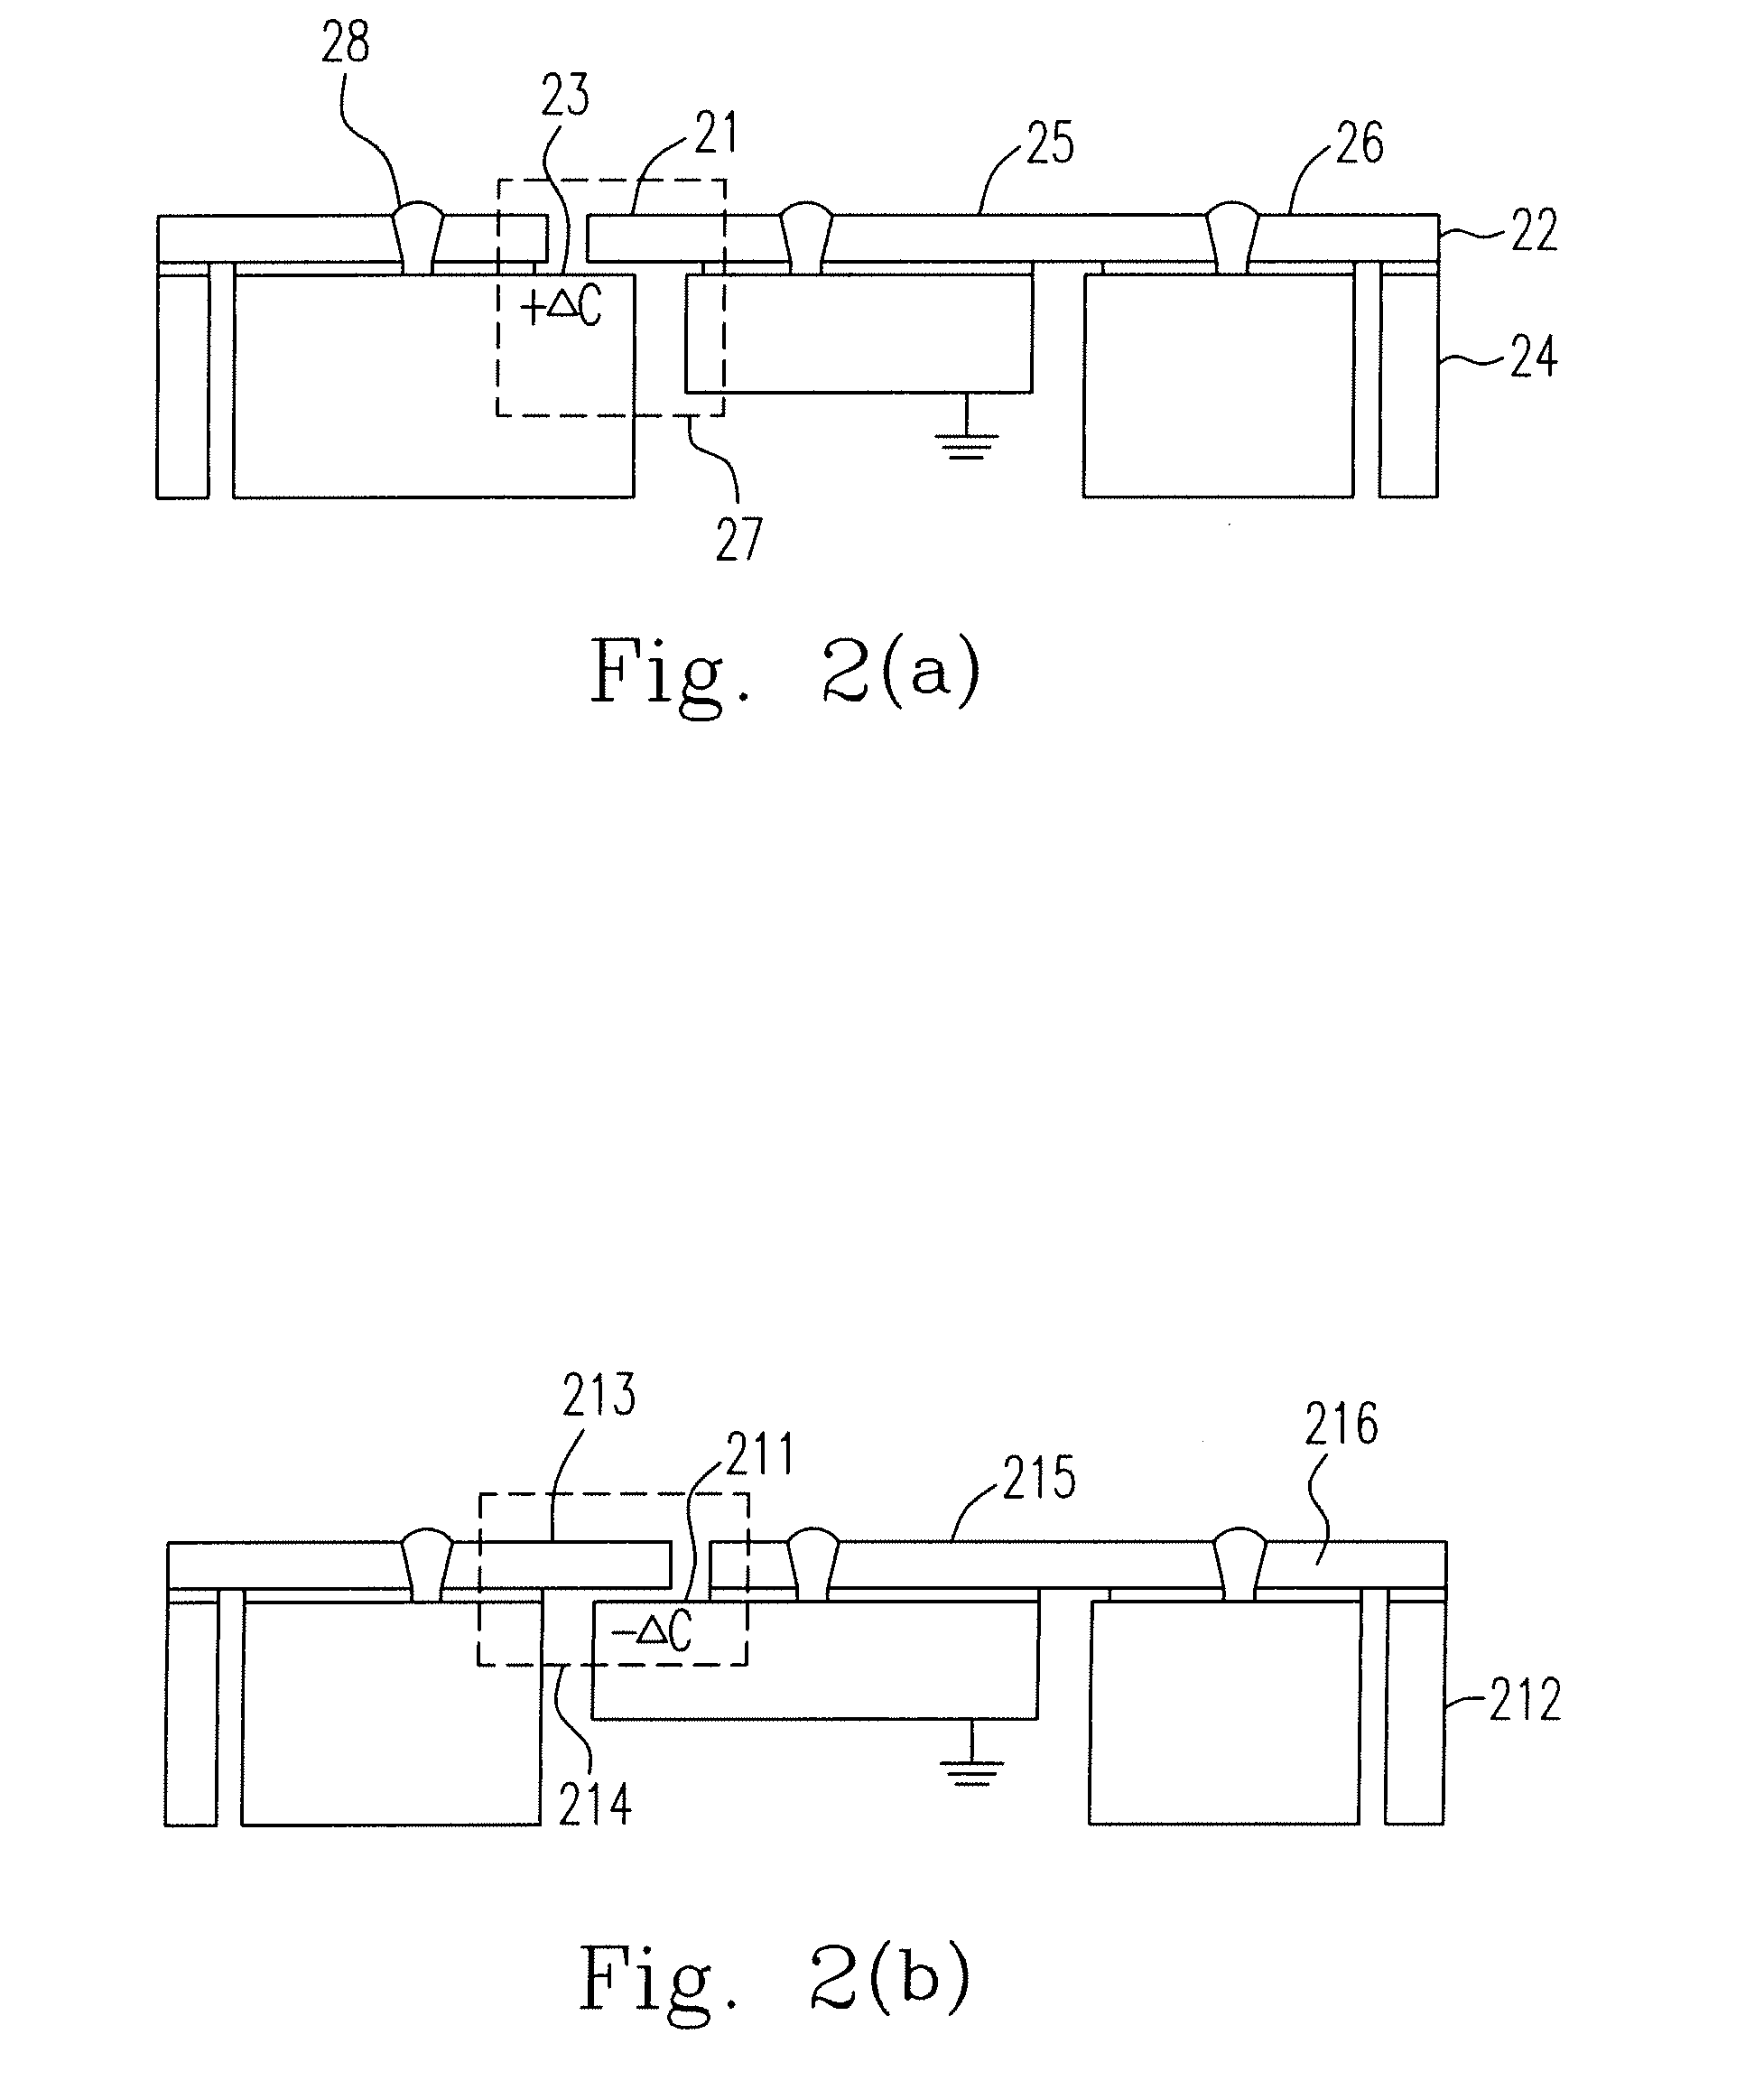 3-Axis Accelerometer With Gap-Closing Capacitive Electrodes